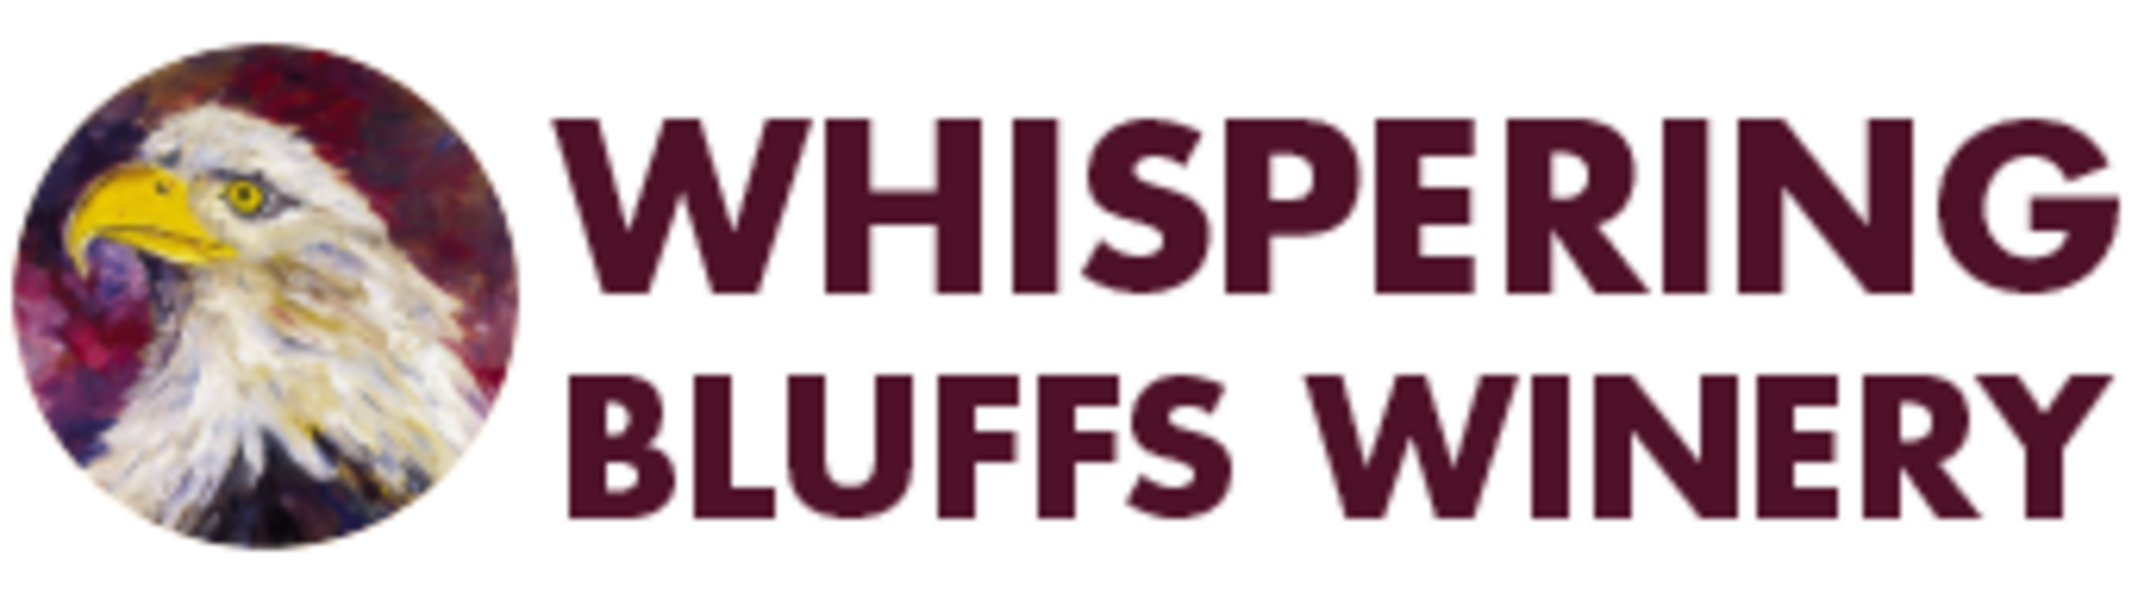 Brand for Whispering Bluff Winery